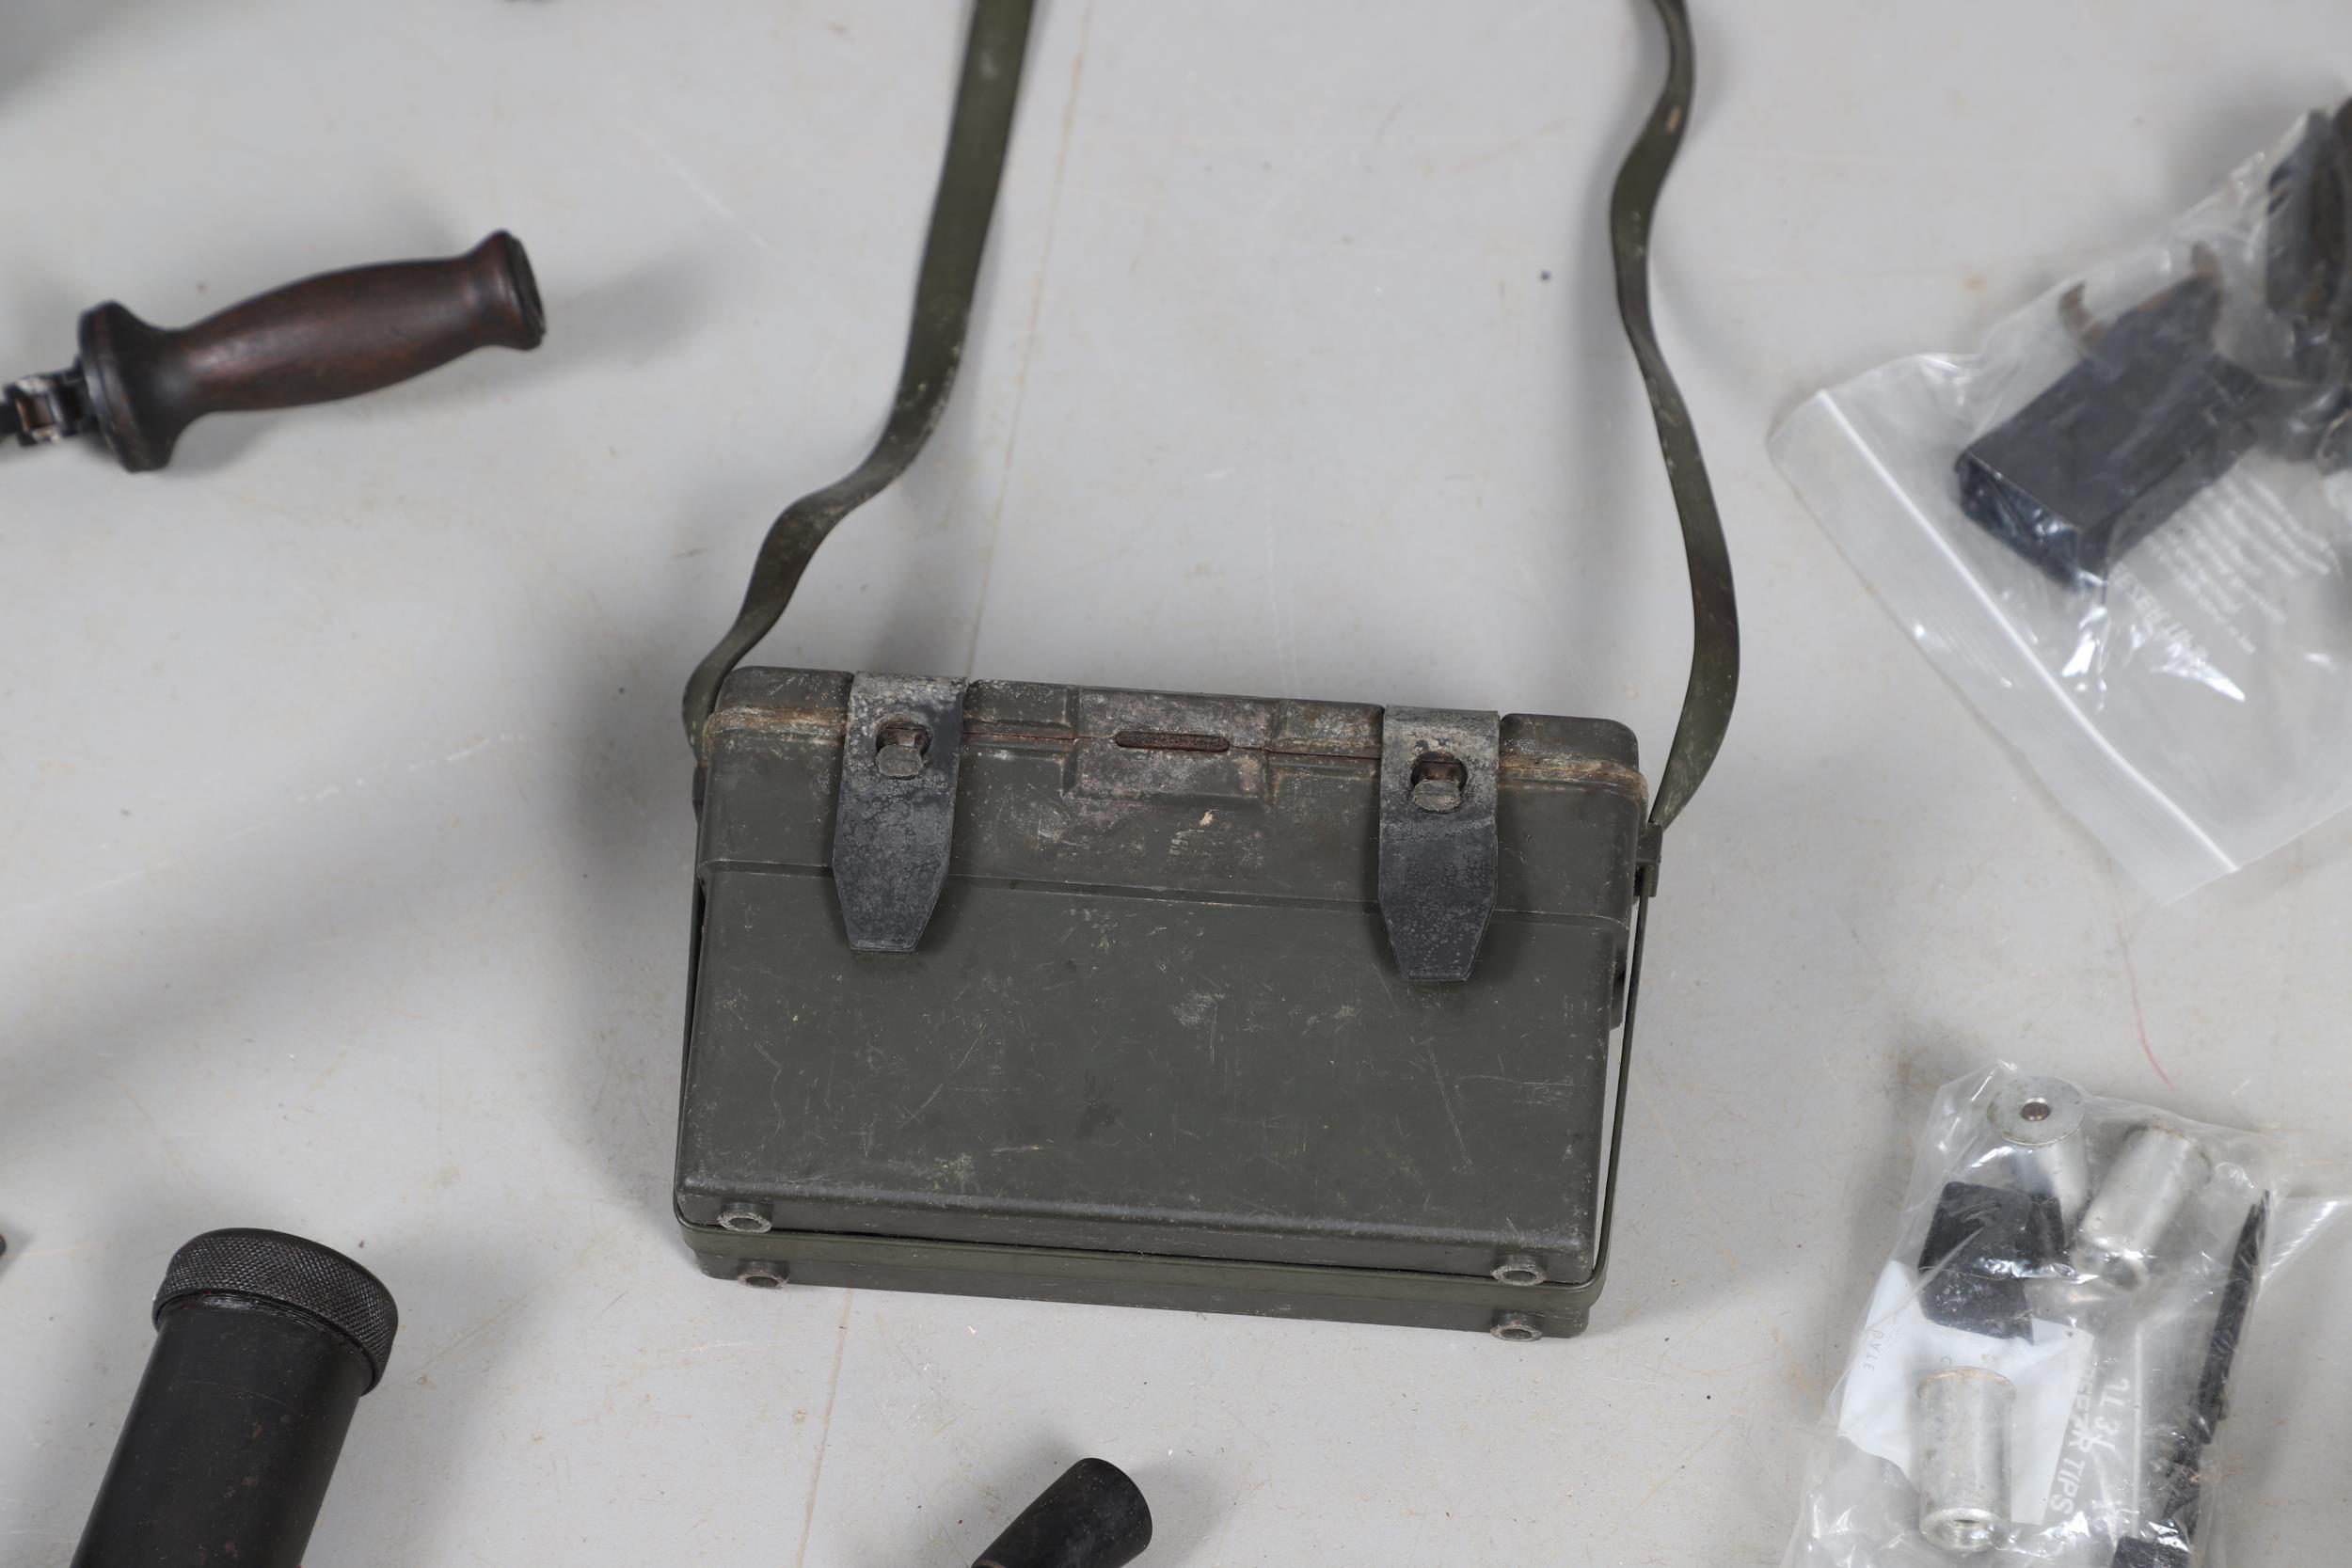 TWO MACHINE GUN BELT LOADING TOOLS AND A COLLECTION OF OTHER ITEMS. - Image 13 of 19